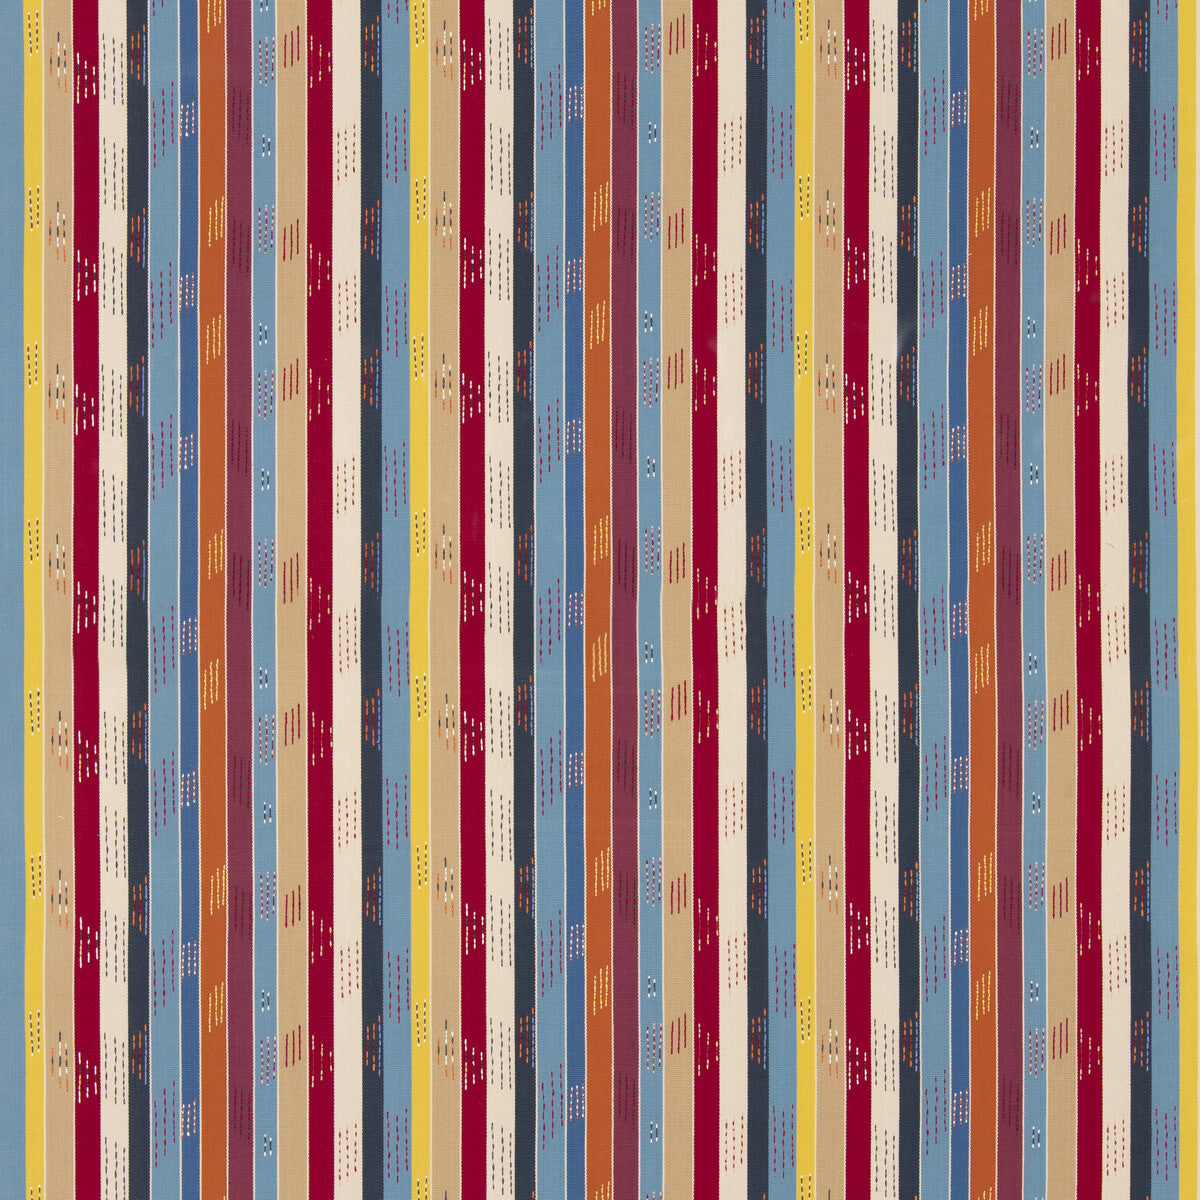 Jogalong fabric in jewel color - pattern BF11061.1.0 - by G P &amp; J Baker in the X Kit Kemp Stripes collection